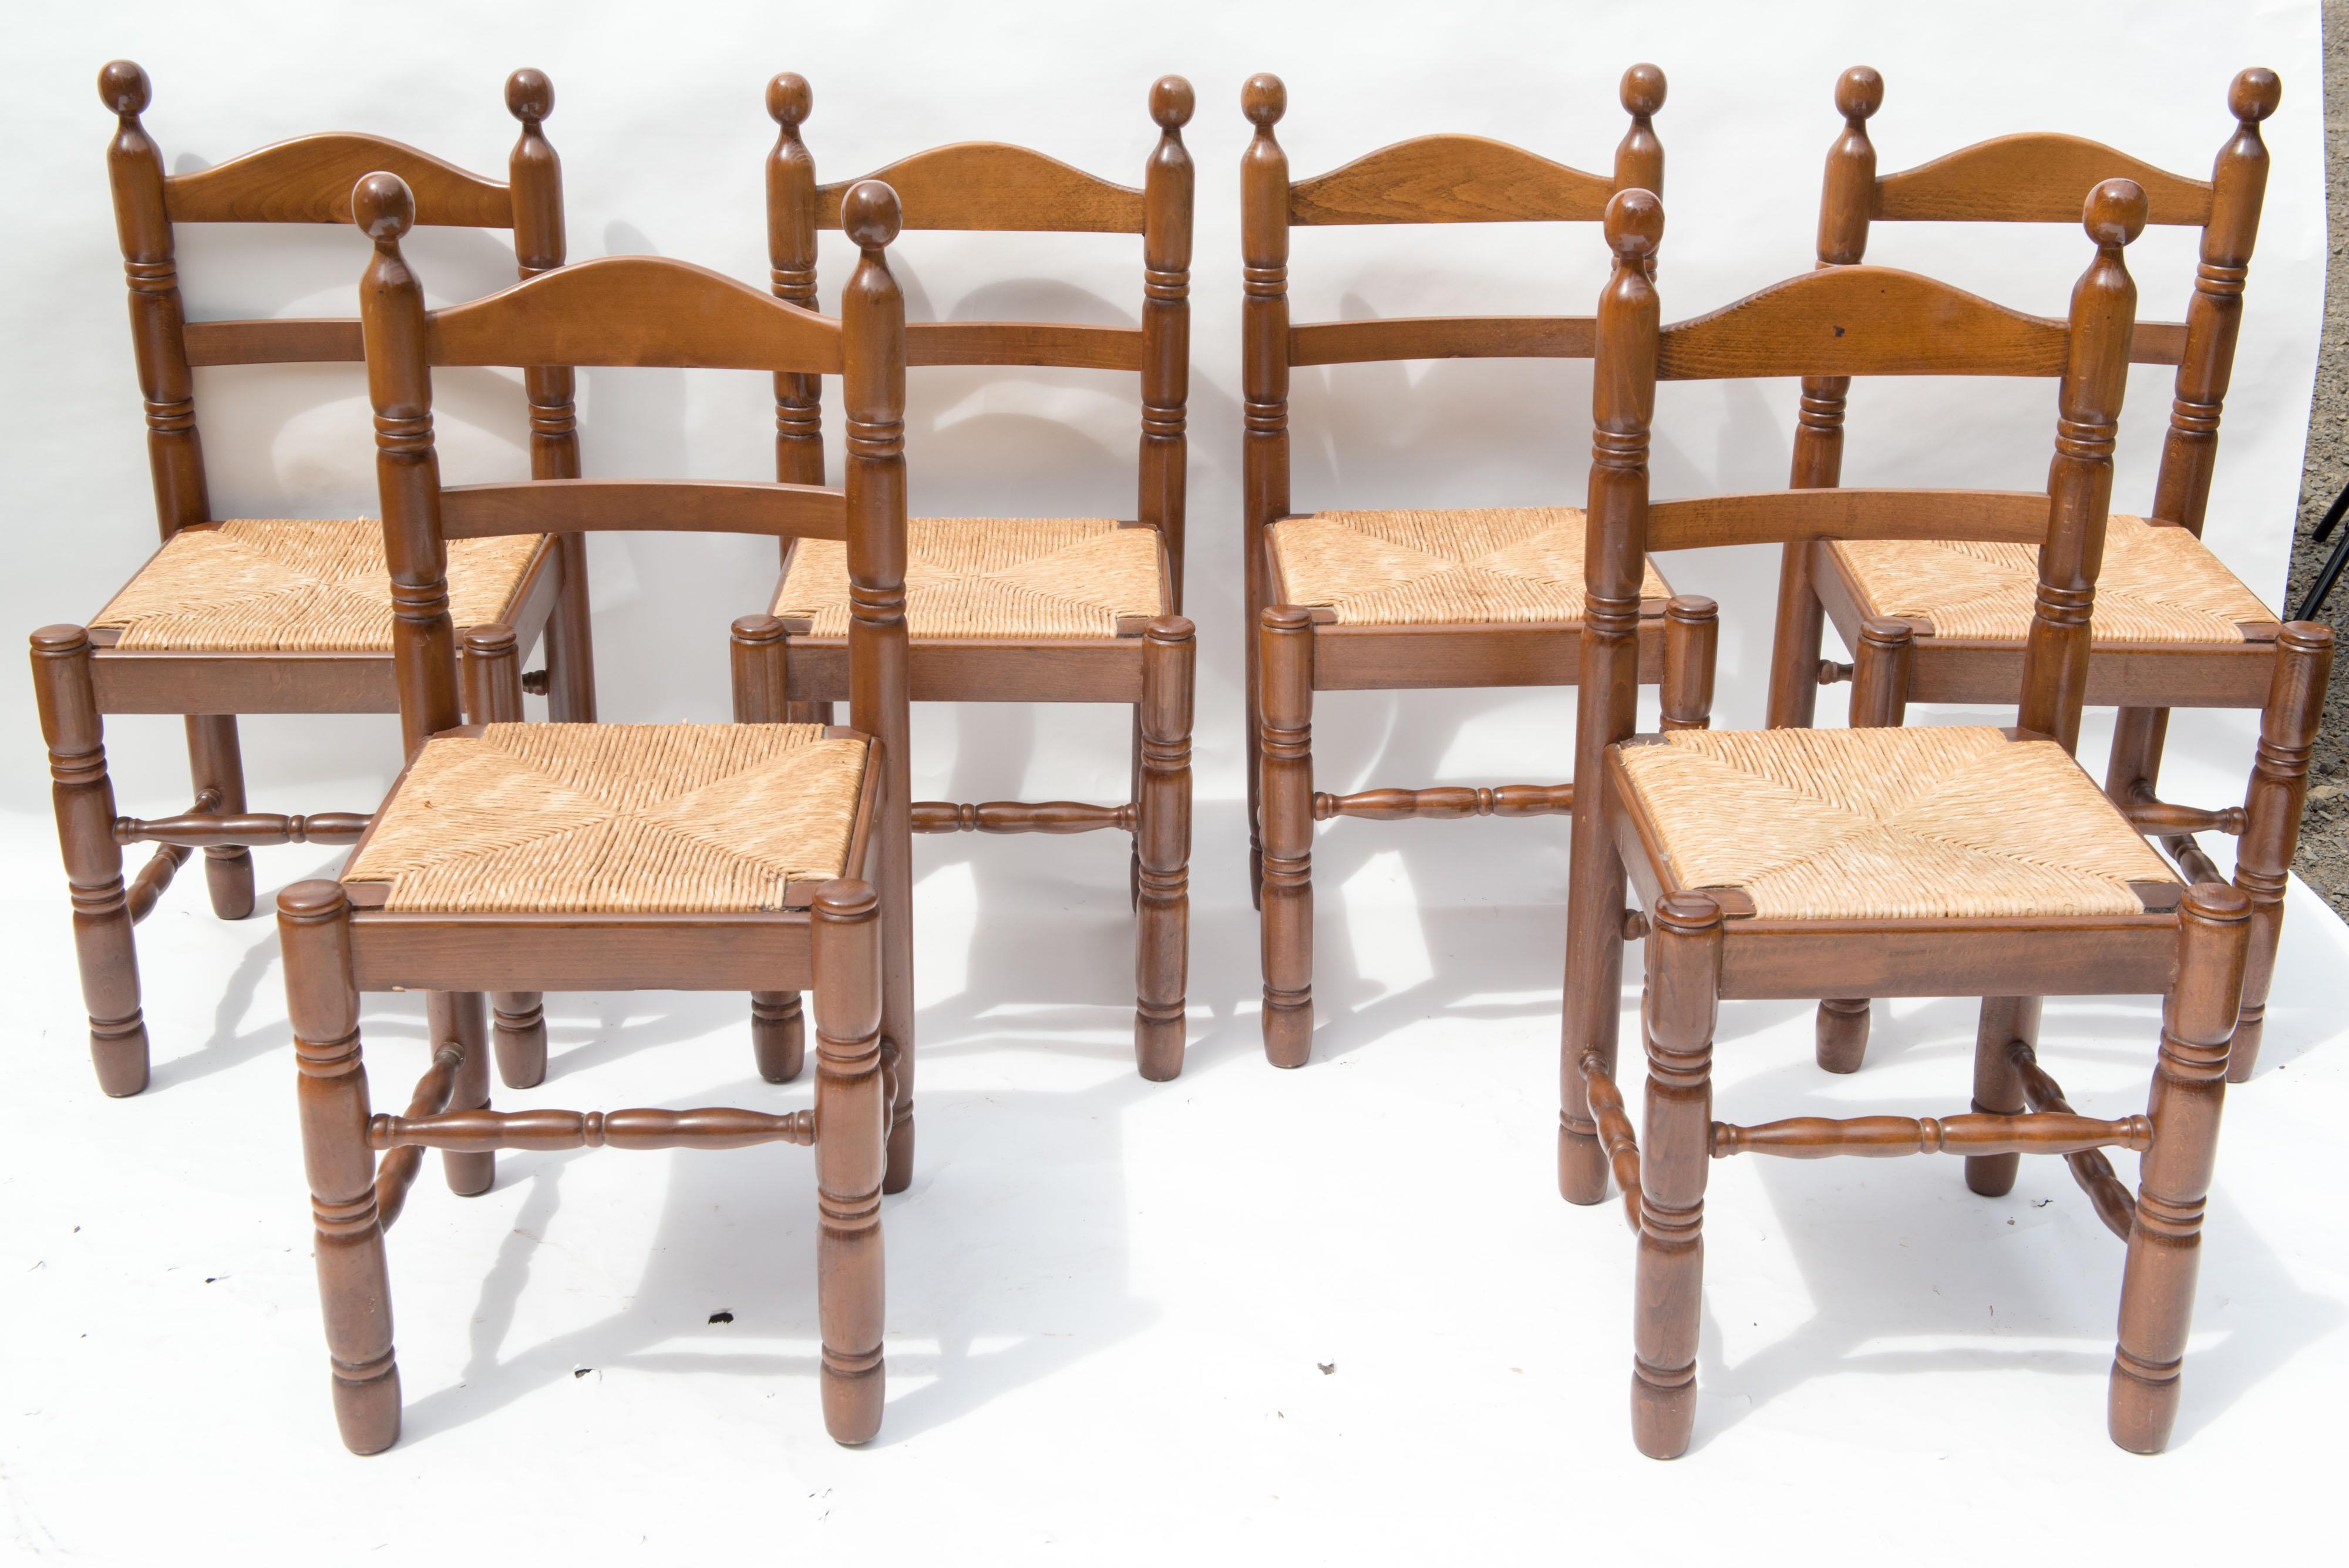 Turned Set of Six French Rustic Ladder Back Dining Chairs, 1960s